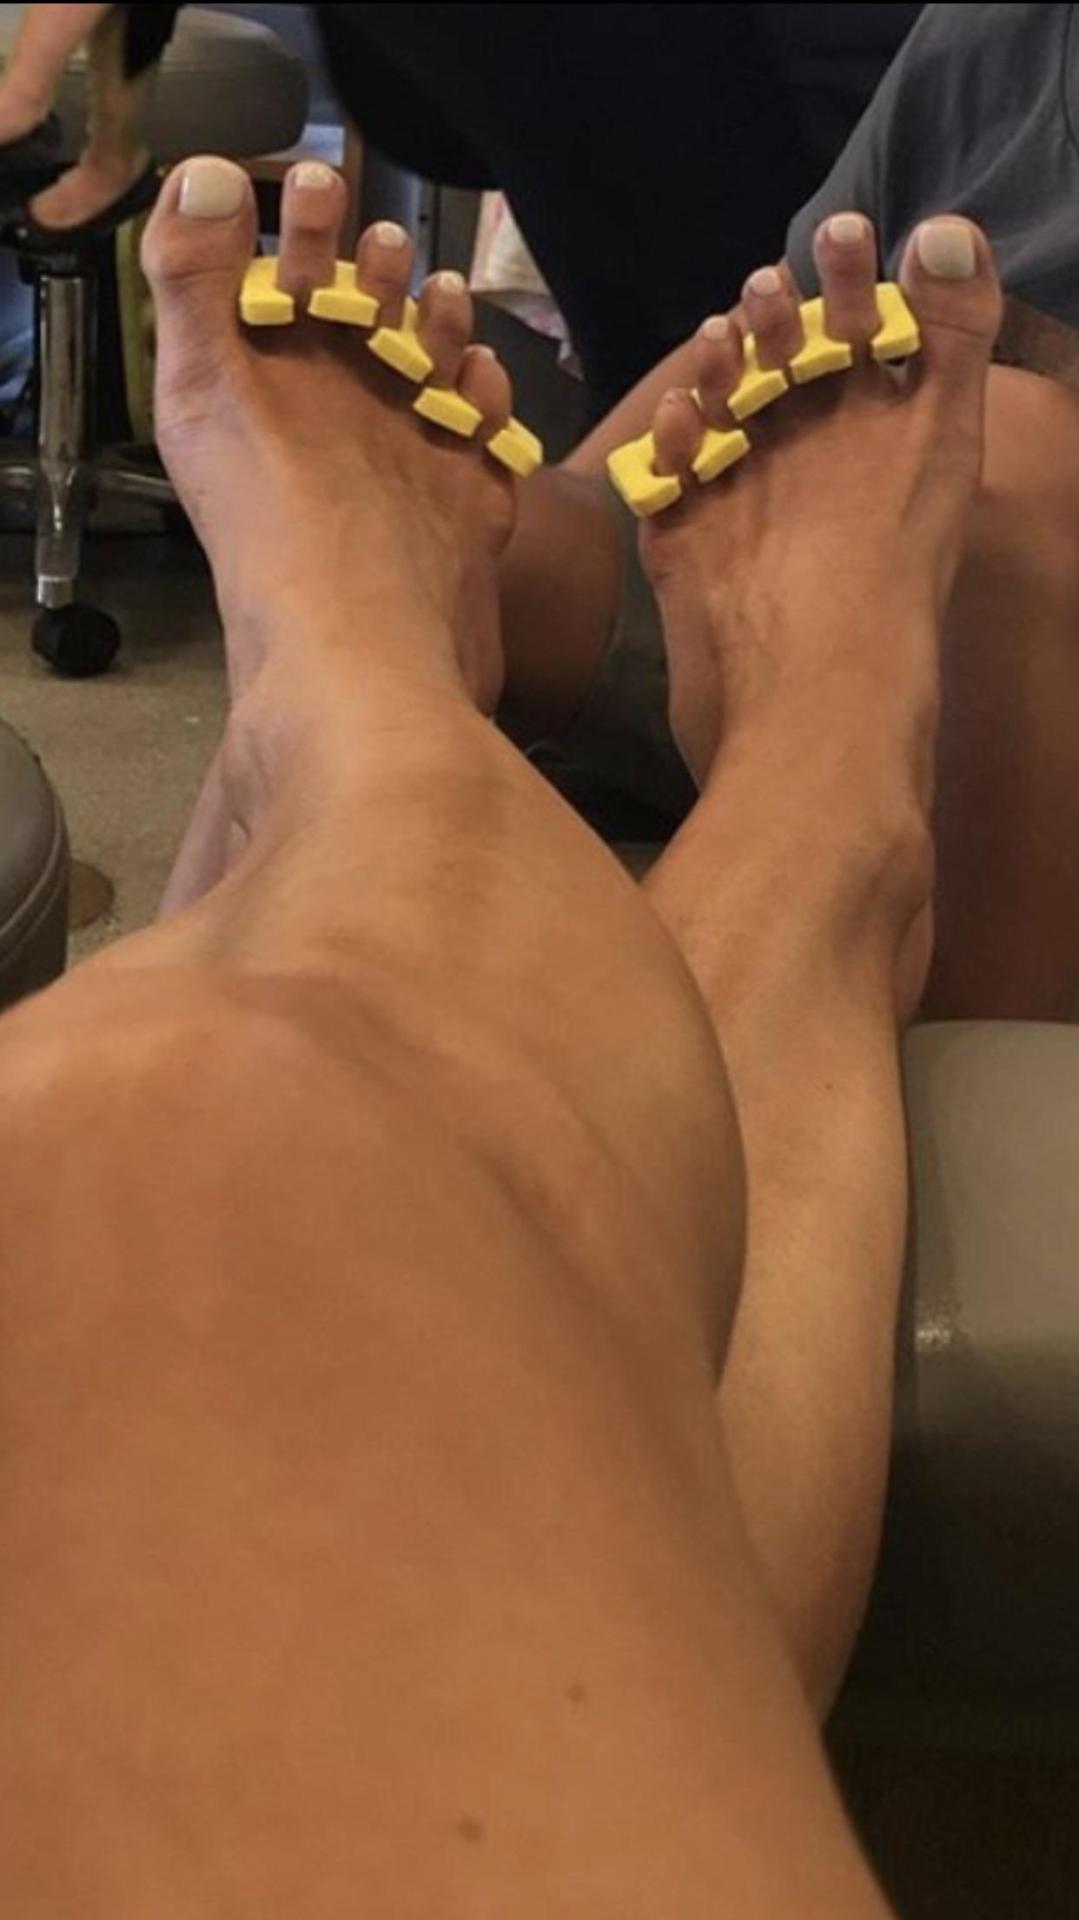 Jordana Brewsteridk Why But This Really Does It Feet Toes Footfetis